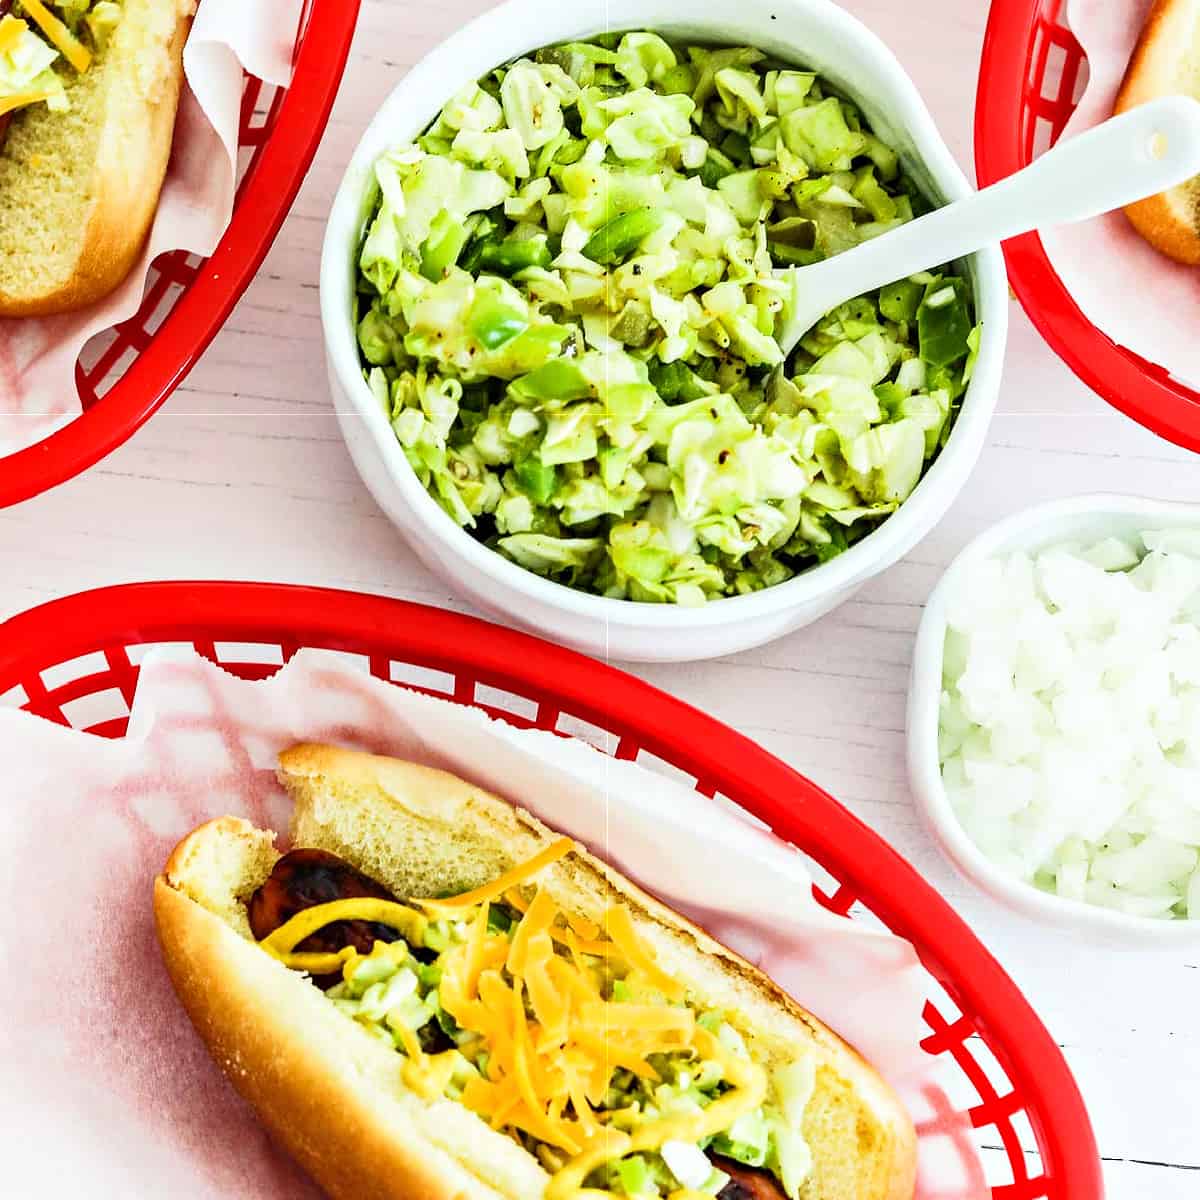 Cheesy Hot Dogs with Pickle-Pepper Relish Recipe